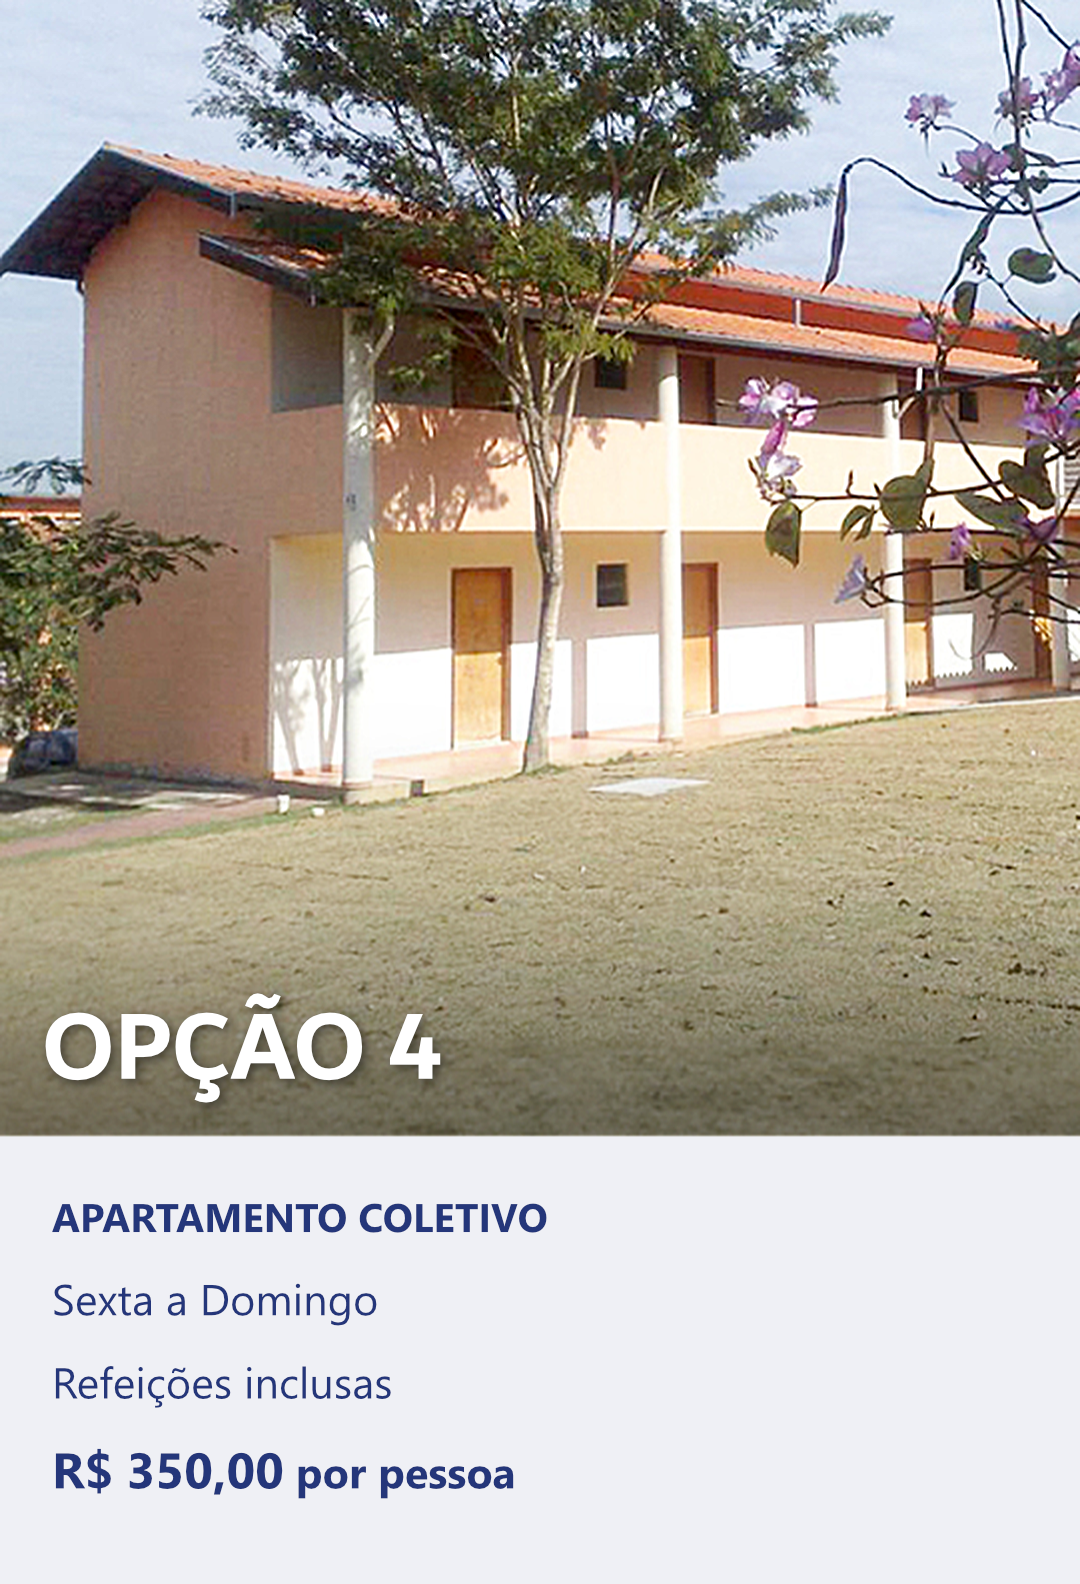 OPTION 04 - COLLECTIVE APARTMENT